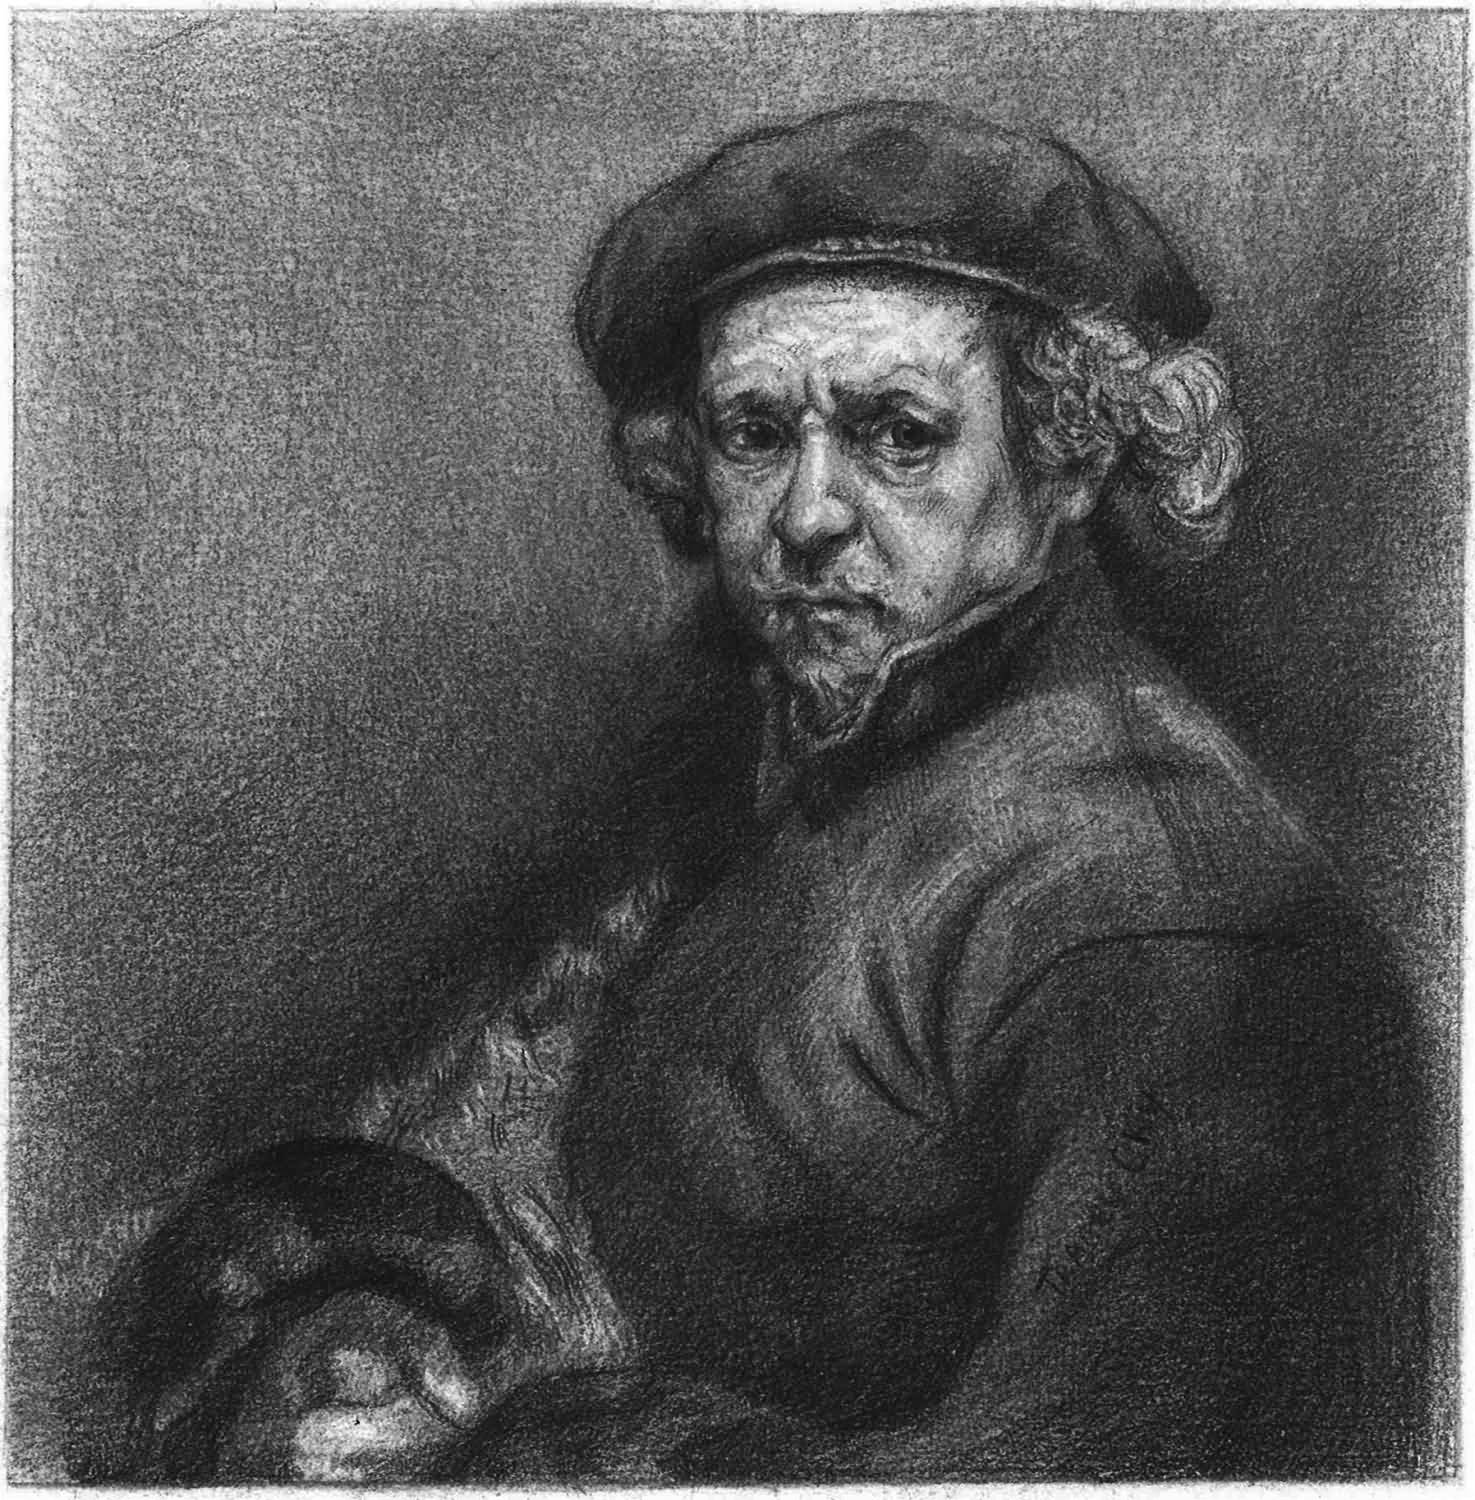 Rembrandt. Graphite on paper. 15x15 cm. Copy of the Rembrandt's painting. 2019